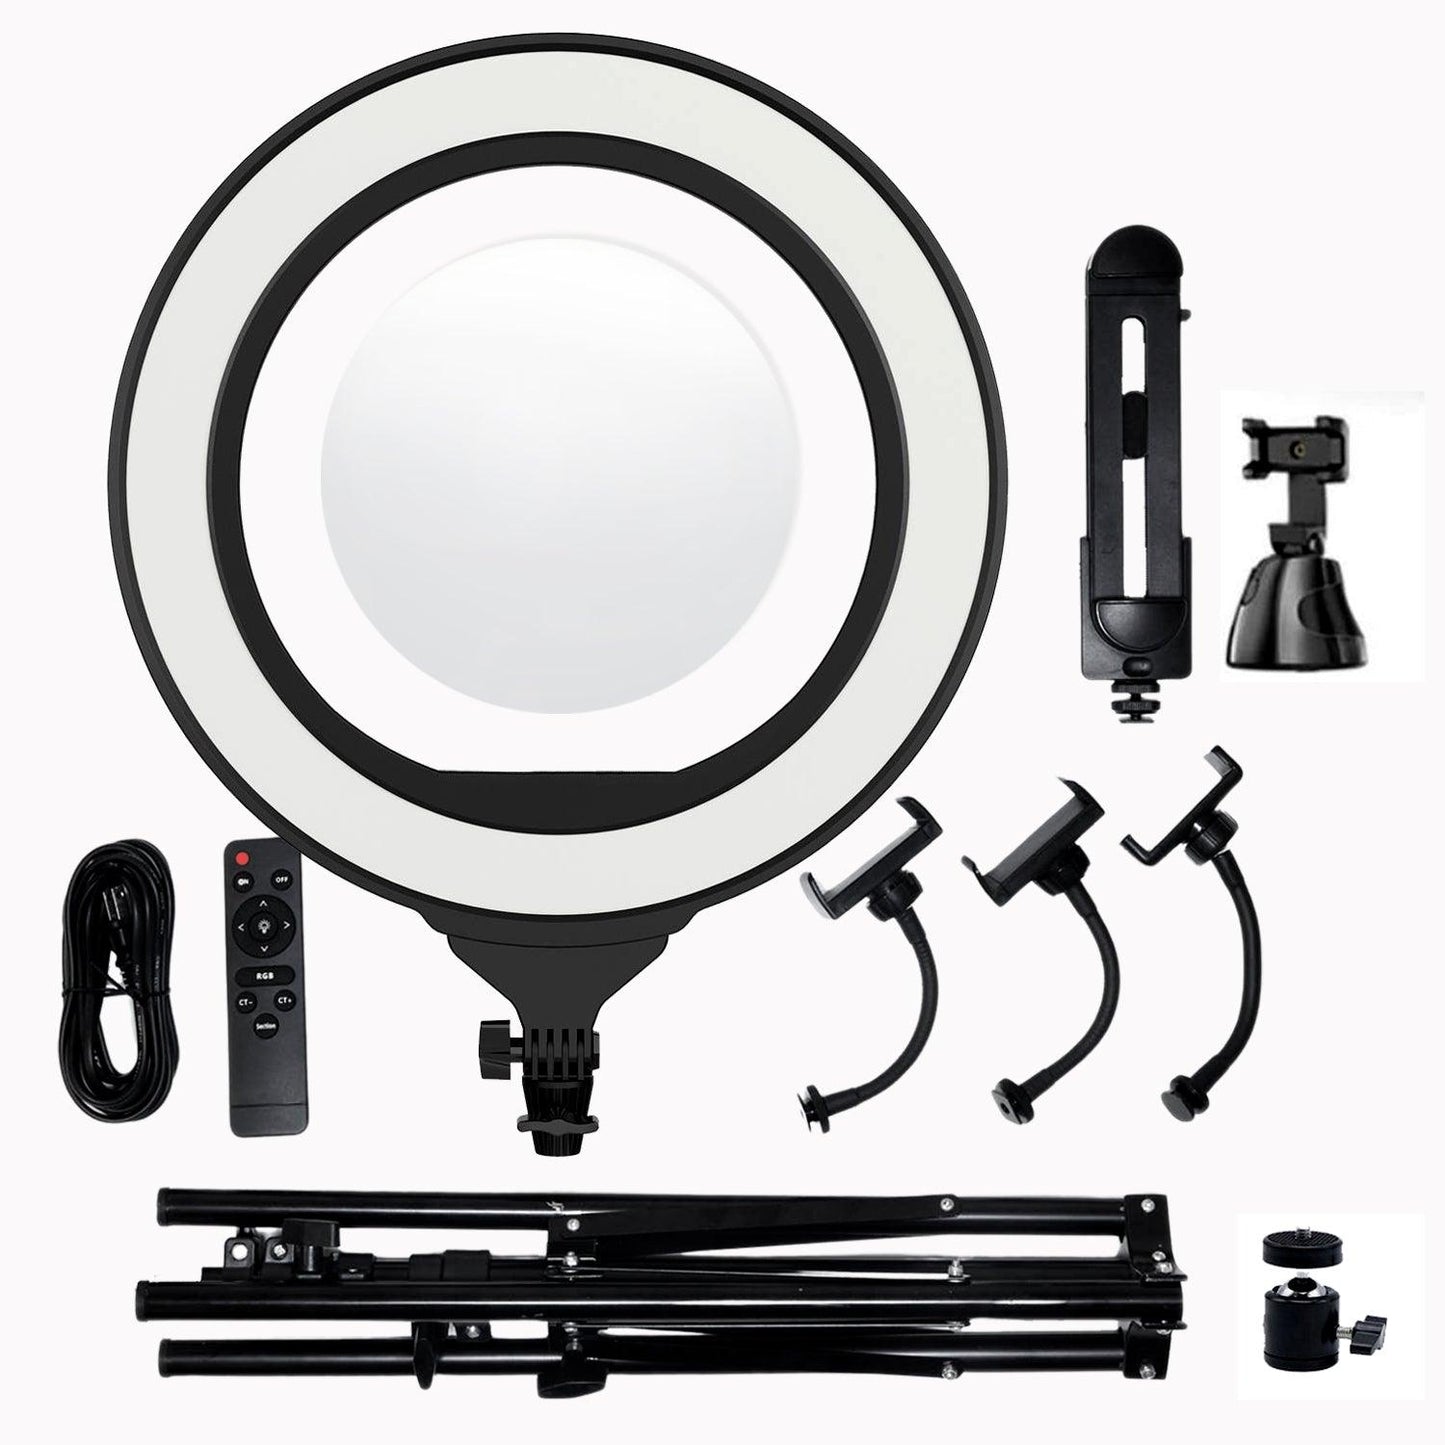 Ultra Elite 18 Ring Light Kit with Stand, iPad Mount, Face Tracker